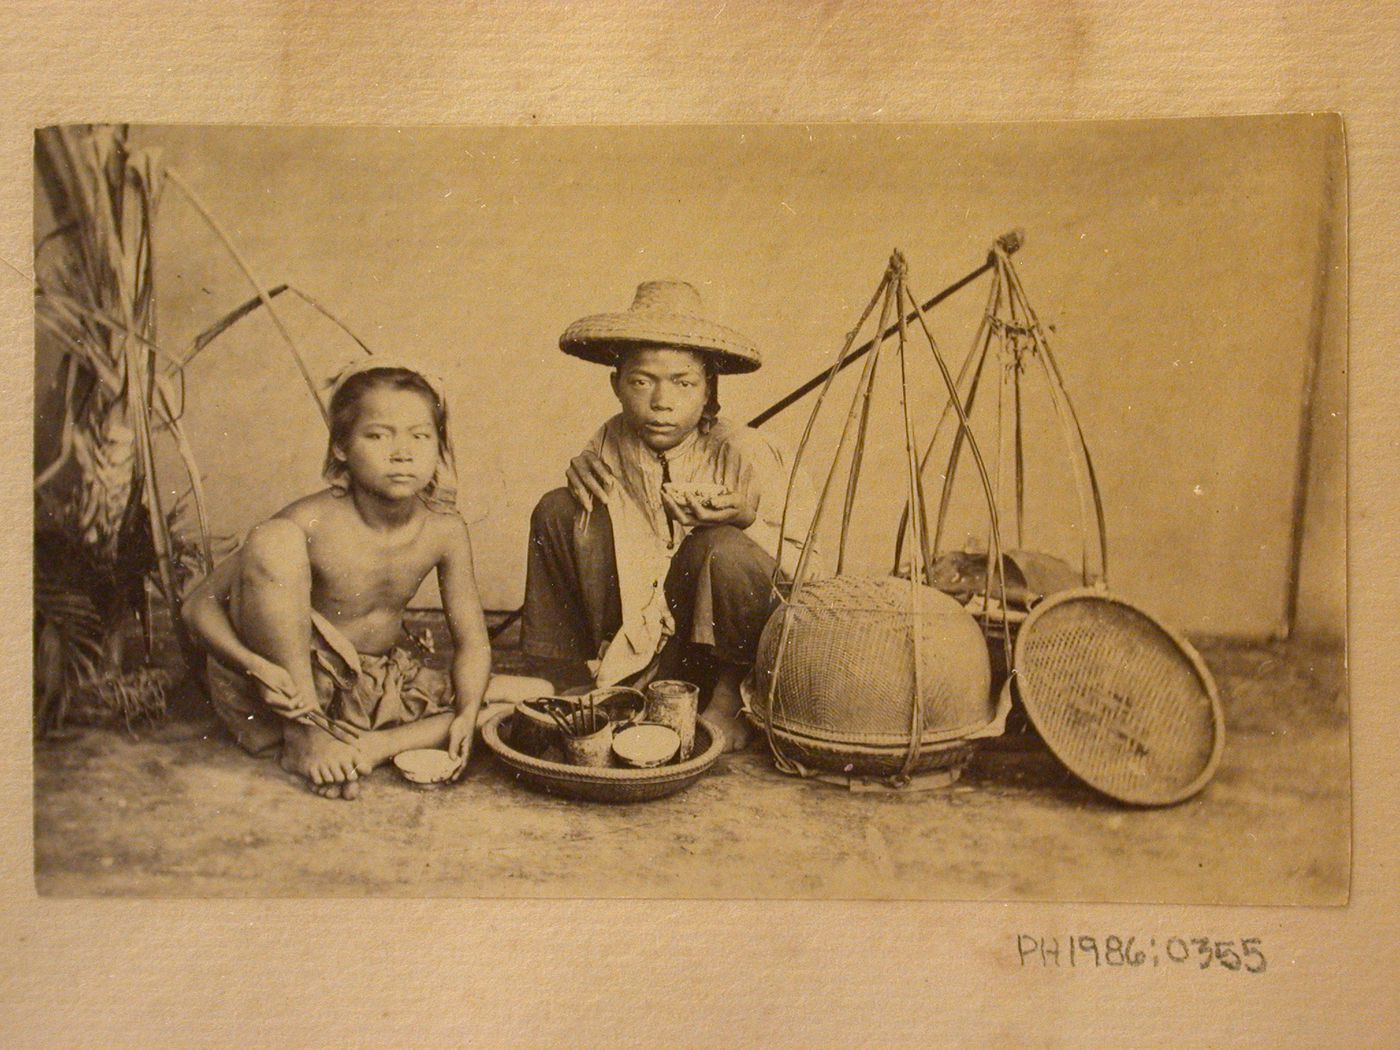 Group portrait of two boys with baskets, probably in Cochin China (now in Vietnam)